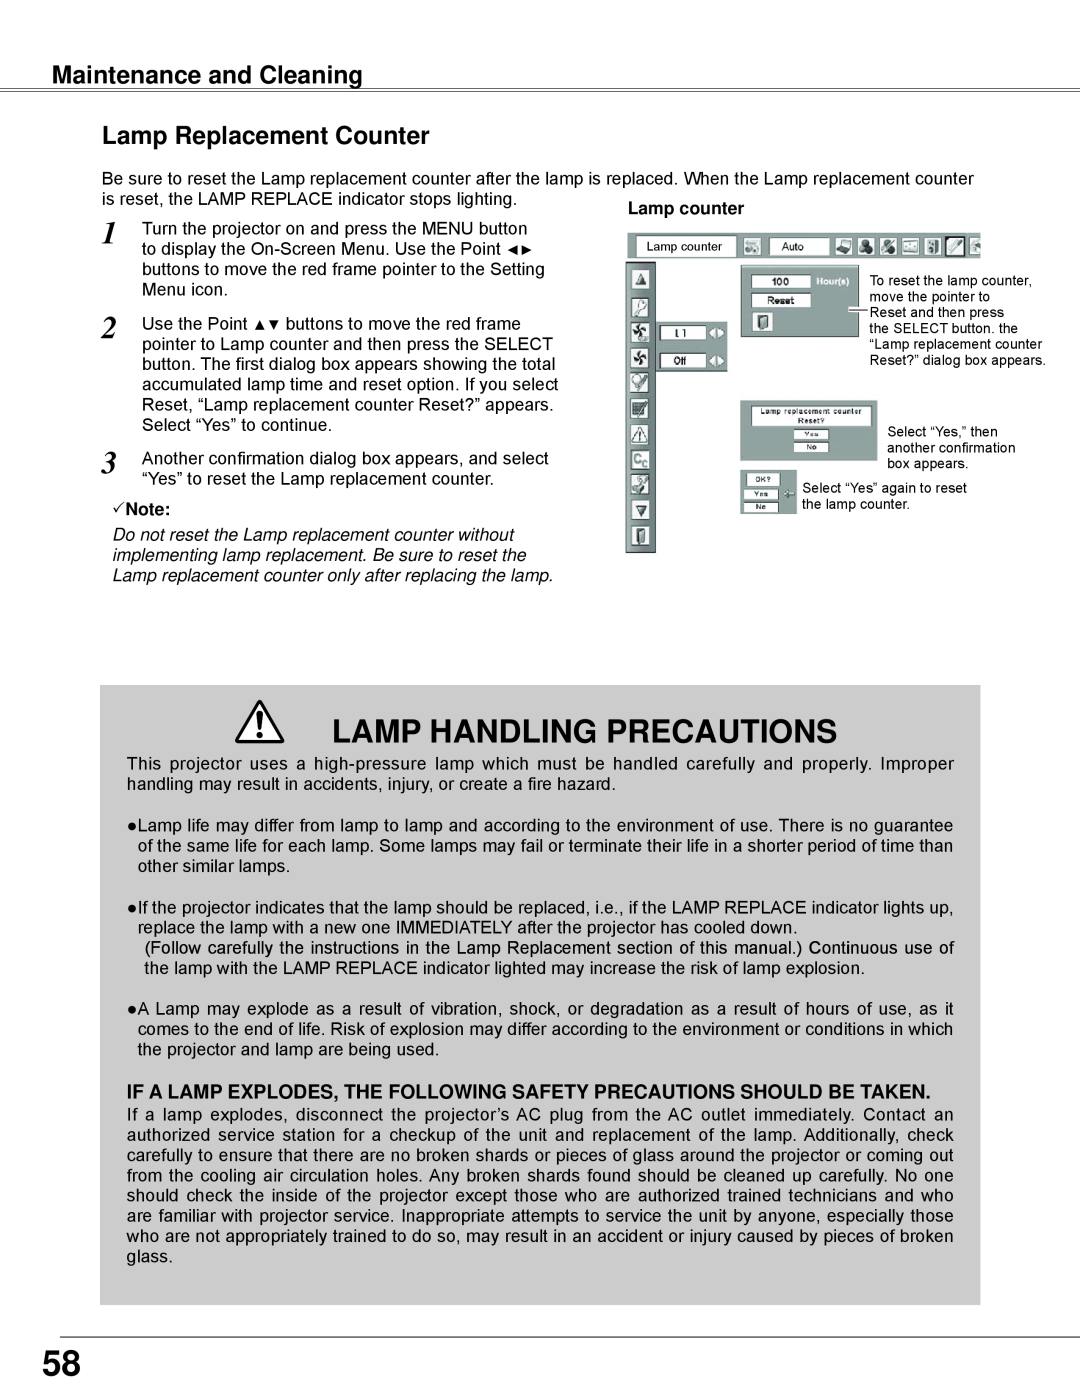 Sanyo PLC-WXE45 owner manual Lamp Handling Precautions, Maintenance and Cleaning Lamp Replacement Counter, Note 